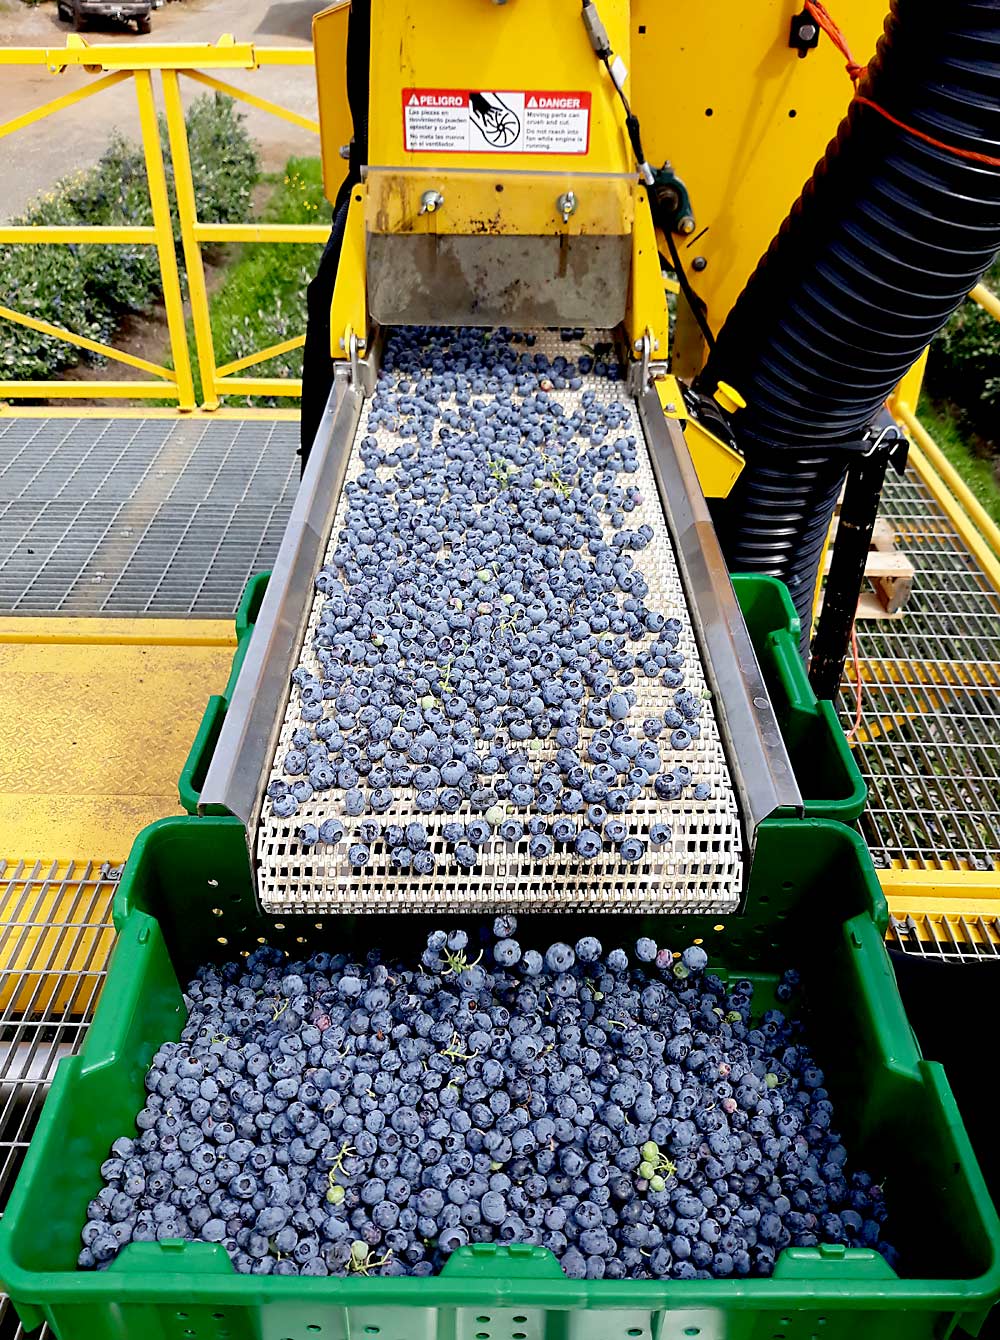 The experimental harvester is shown in action as blueberries are gathered into catch bins. (Courtesy Lisa DeVetter)